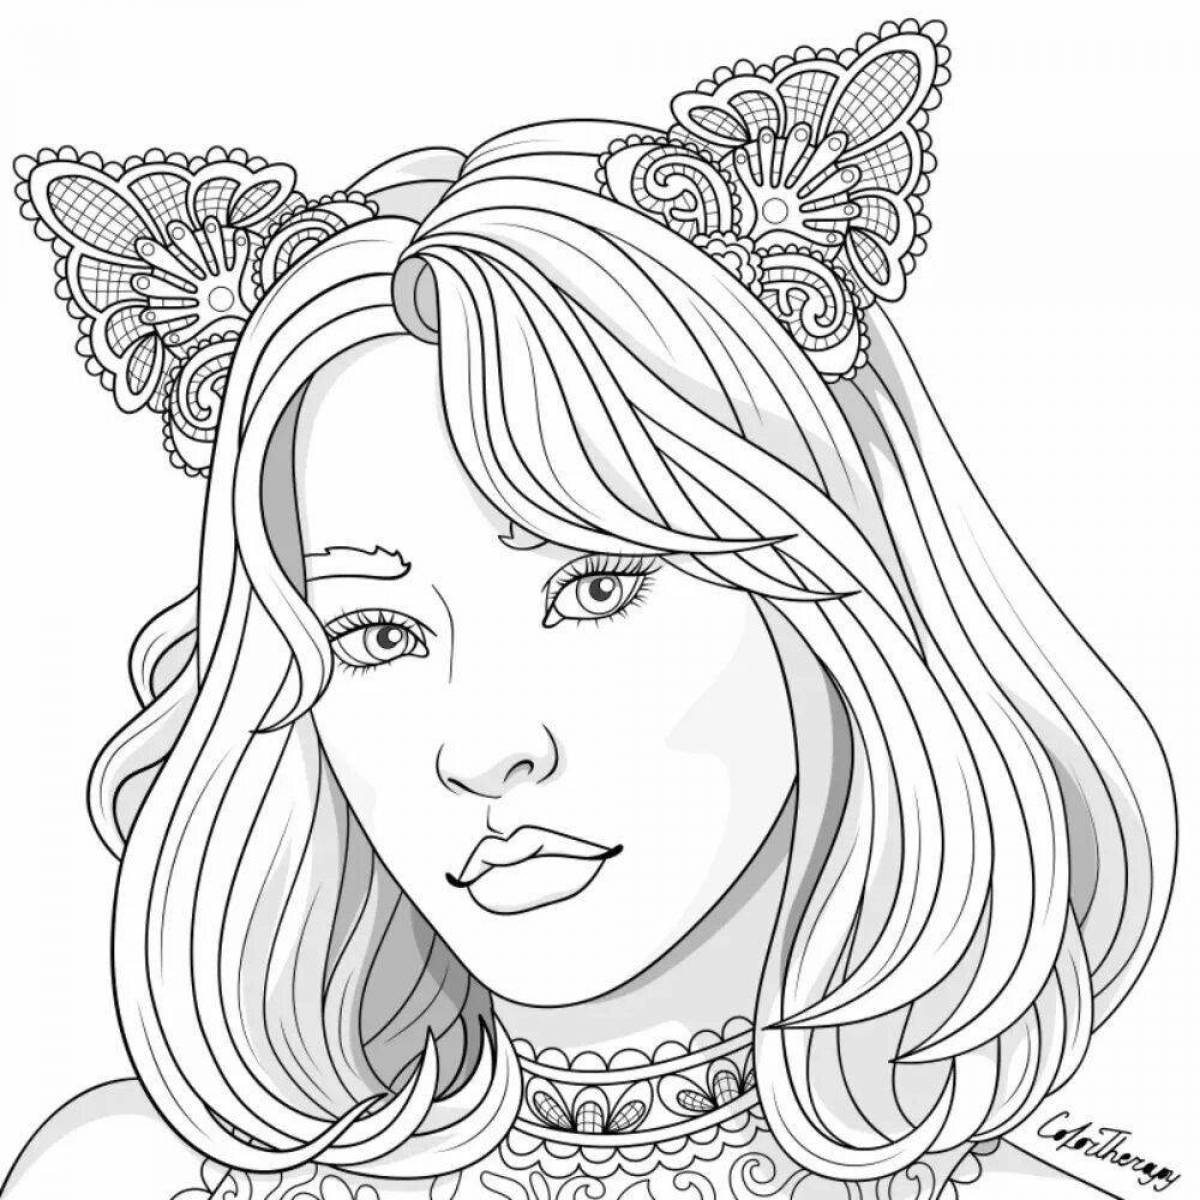 Difficult people coloring book